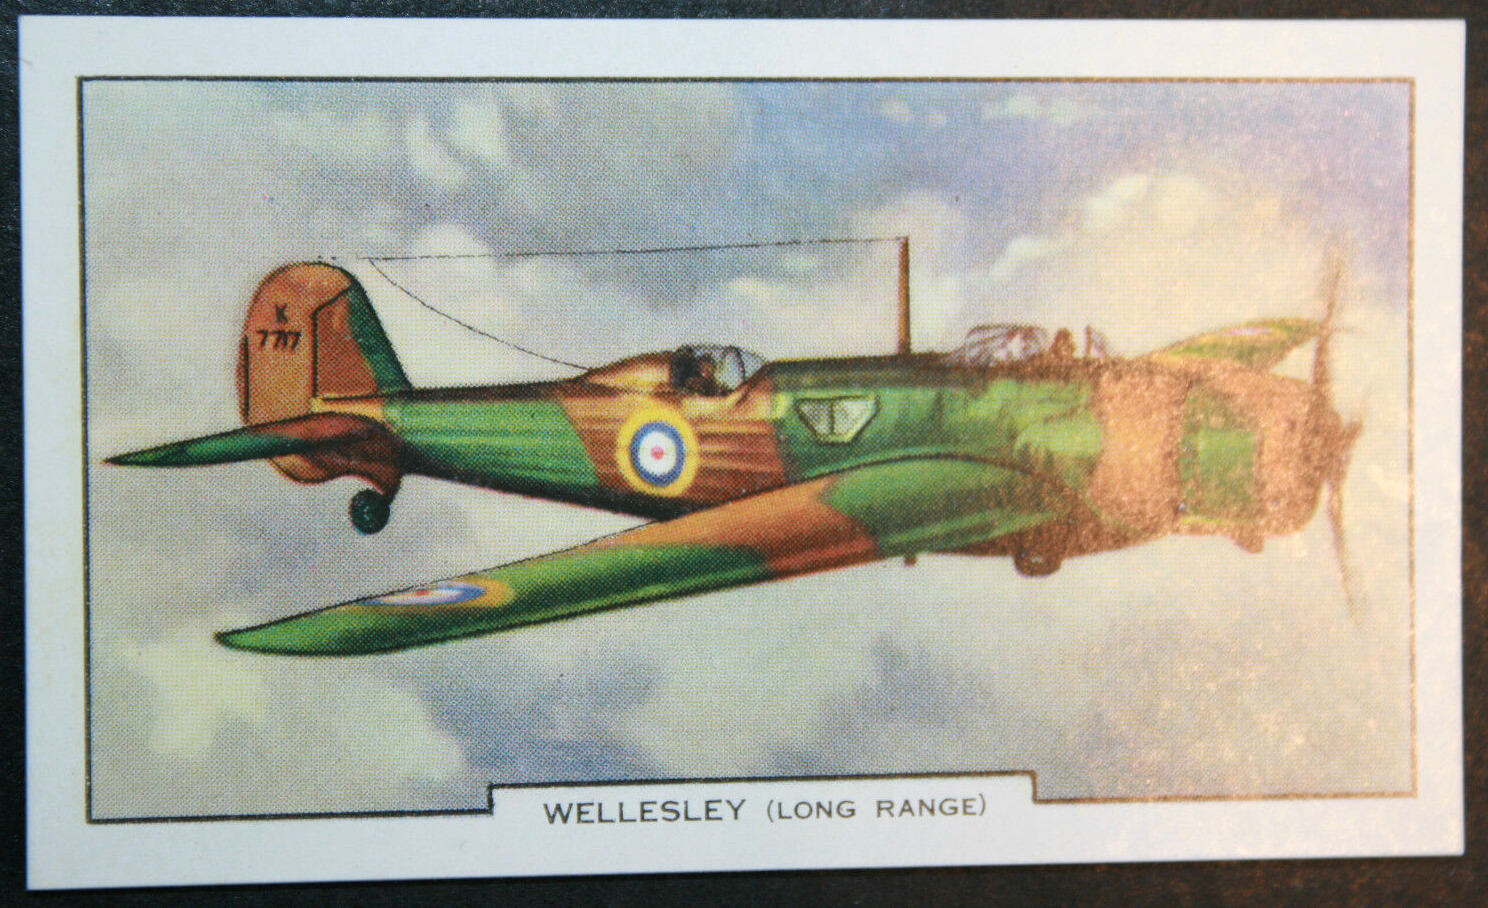 VICKERS ARMSTRONG WELLESLEY  RAF Bomber    Vintage 1939 Illustrated Card   ED21M